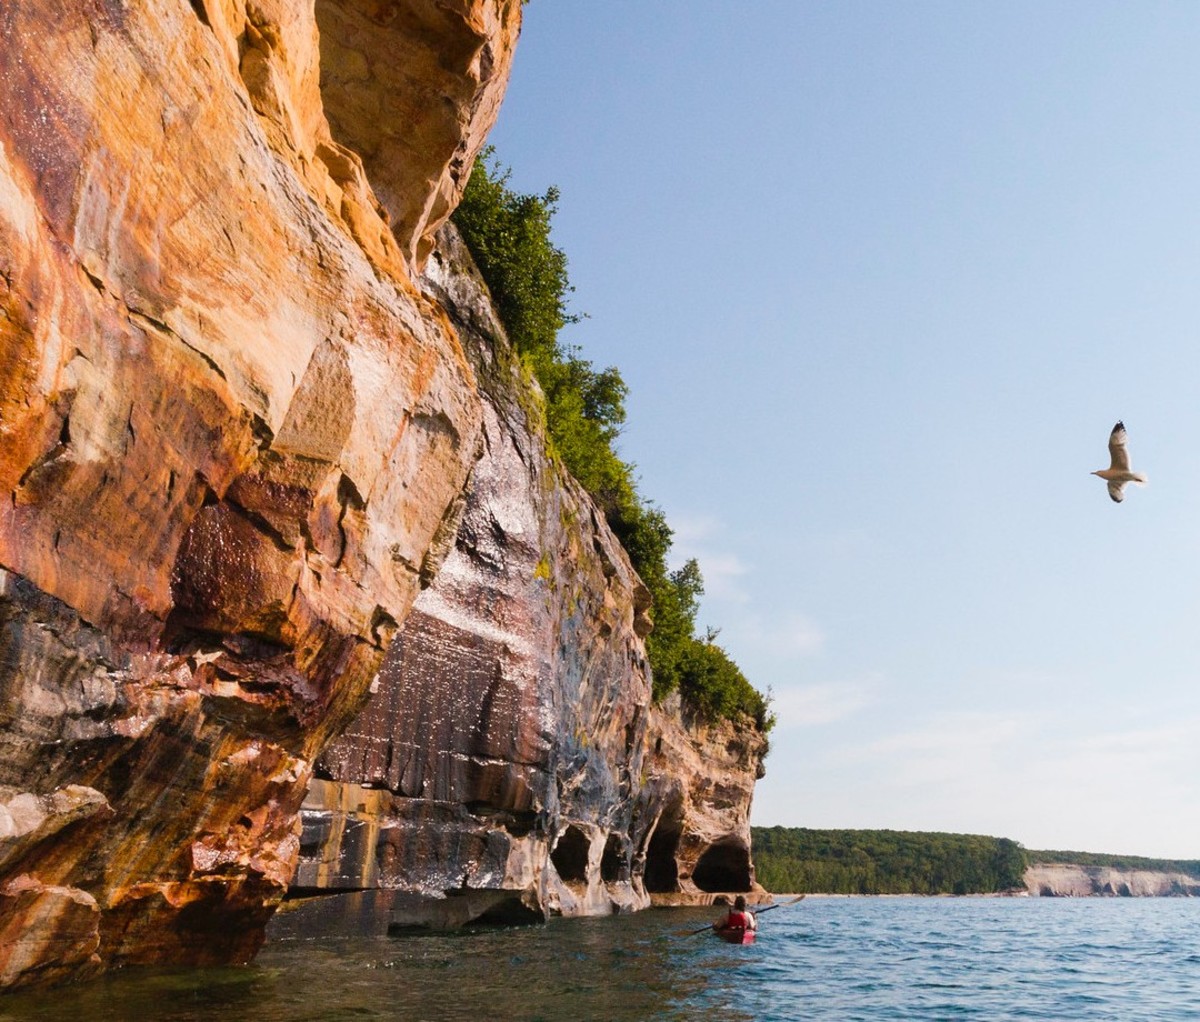 Pictured Rocks is an extraordinary place to paddle in fair weather.